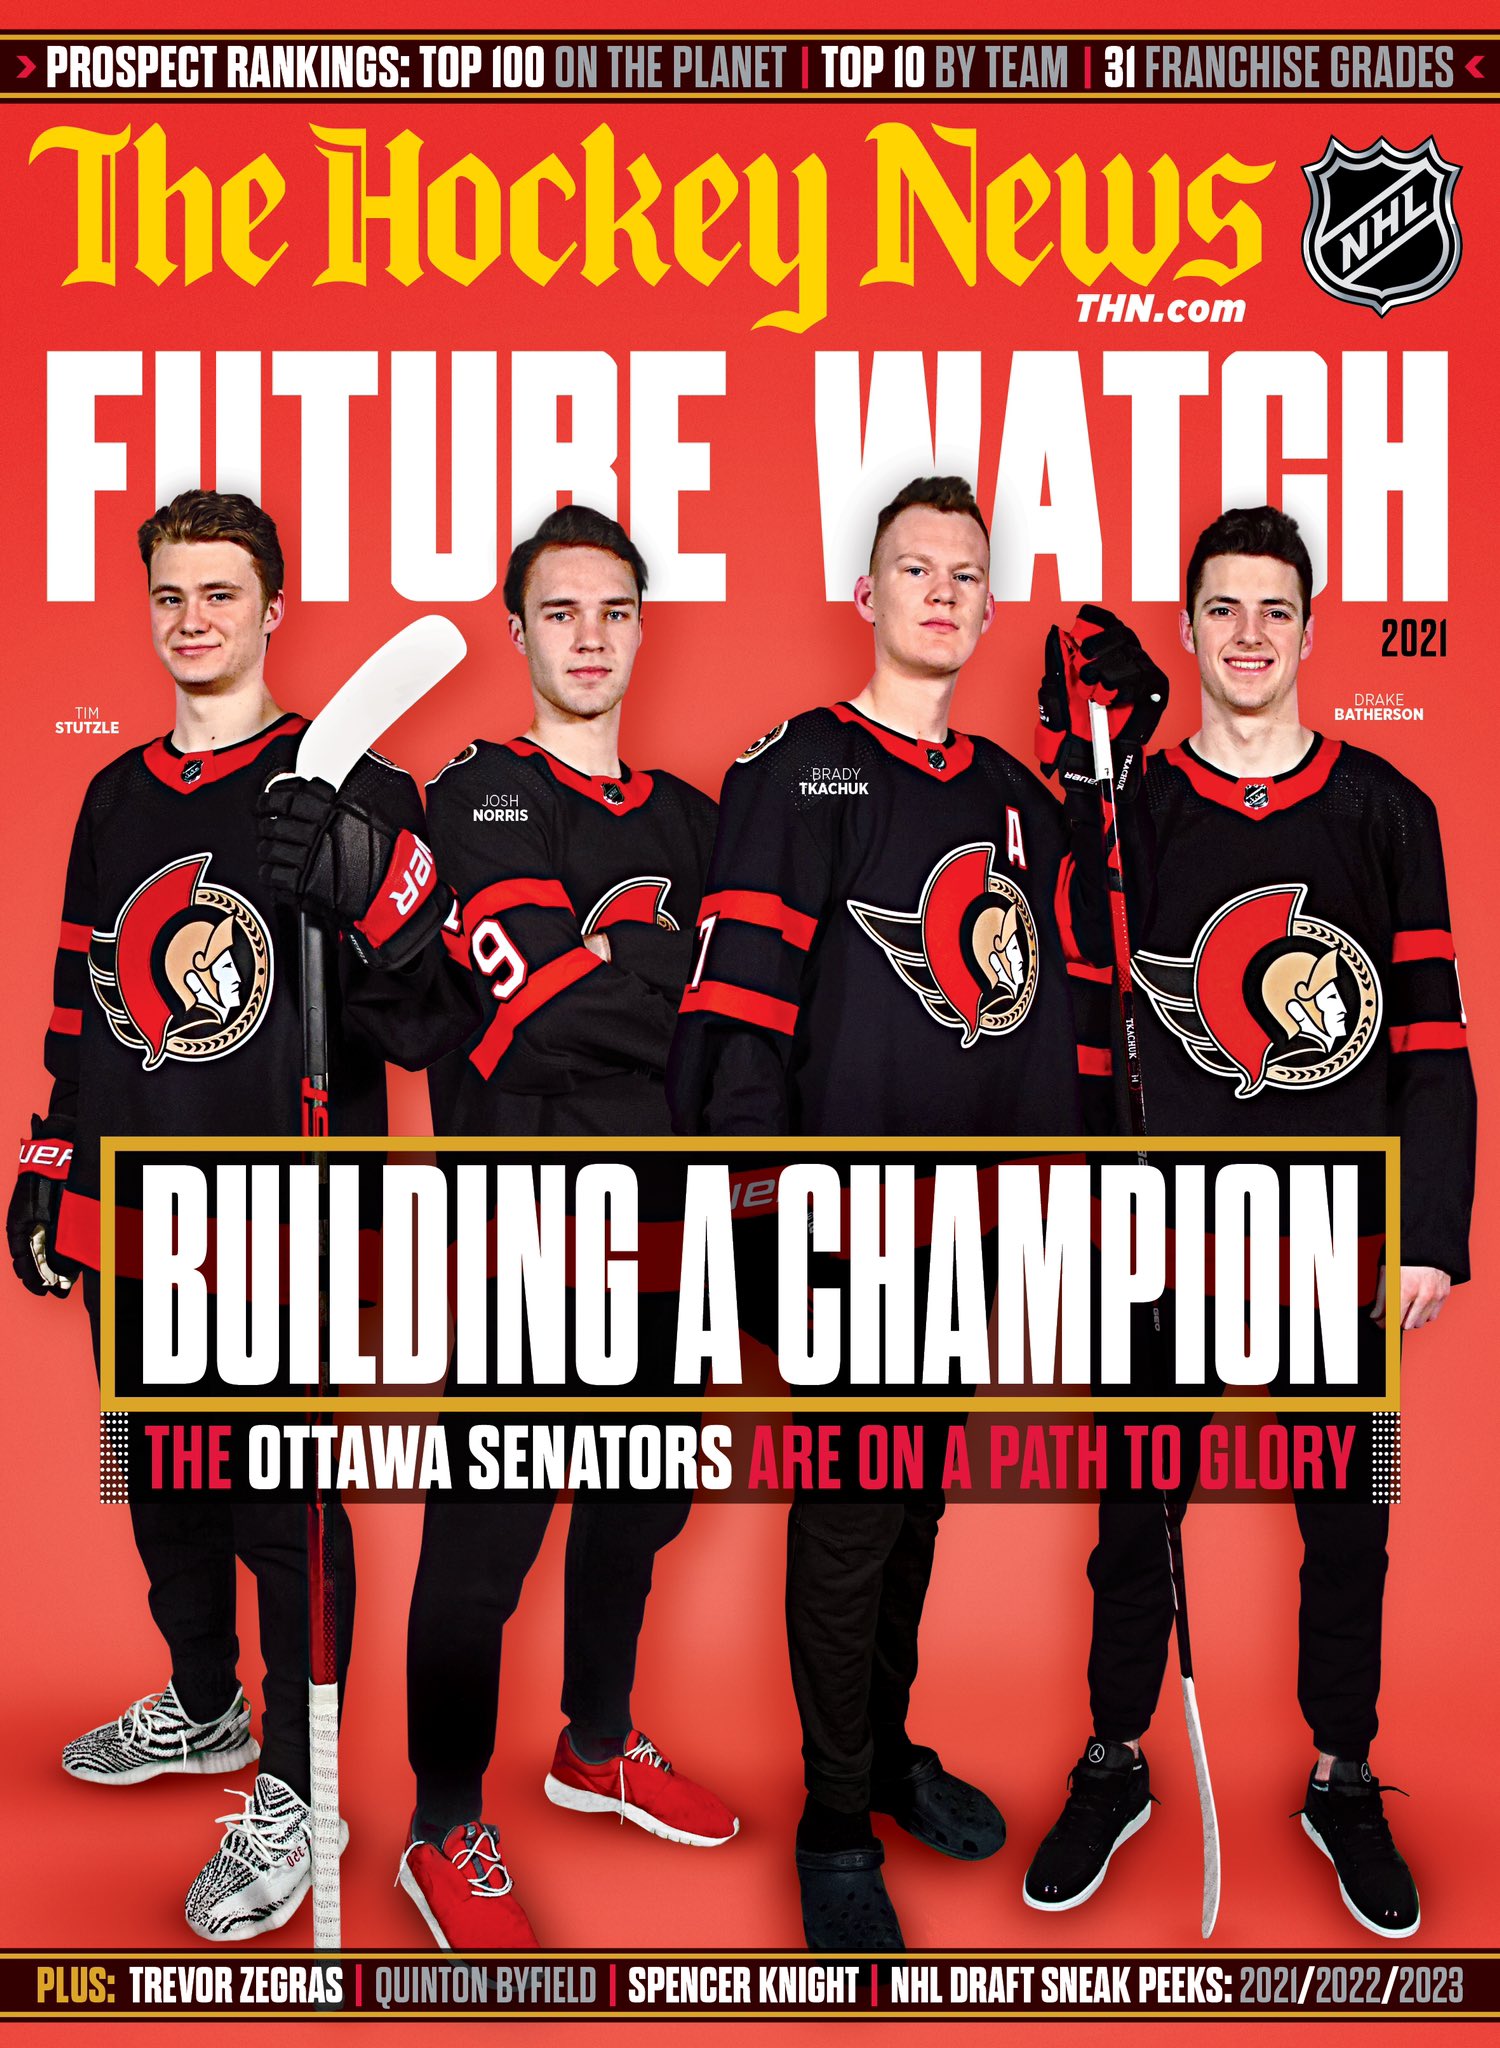 Our Ottawa Senators Collection is now available Ottawa-wide at